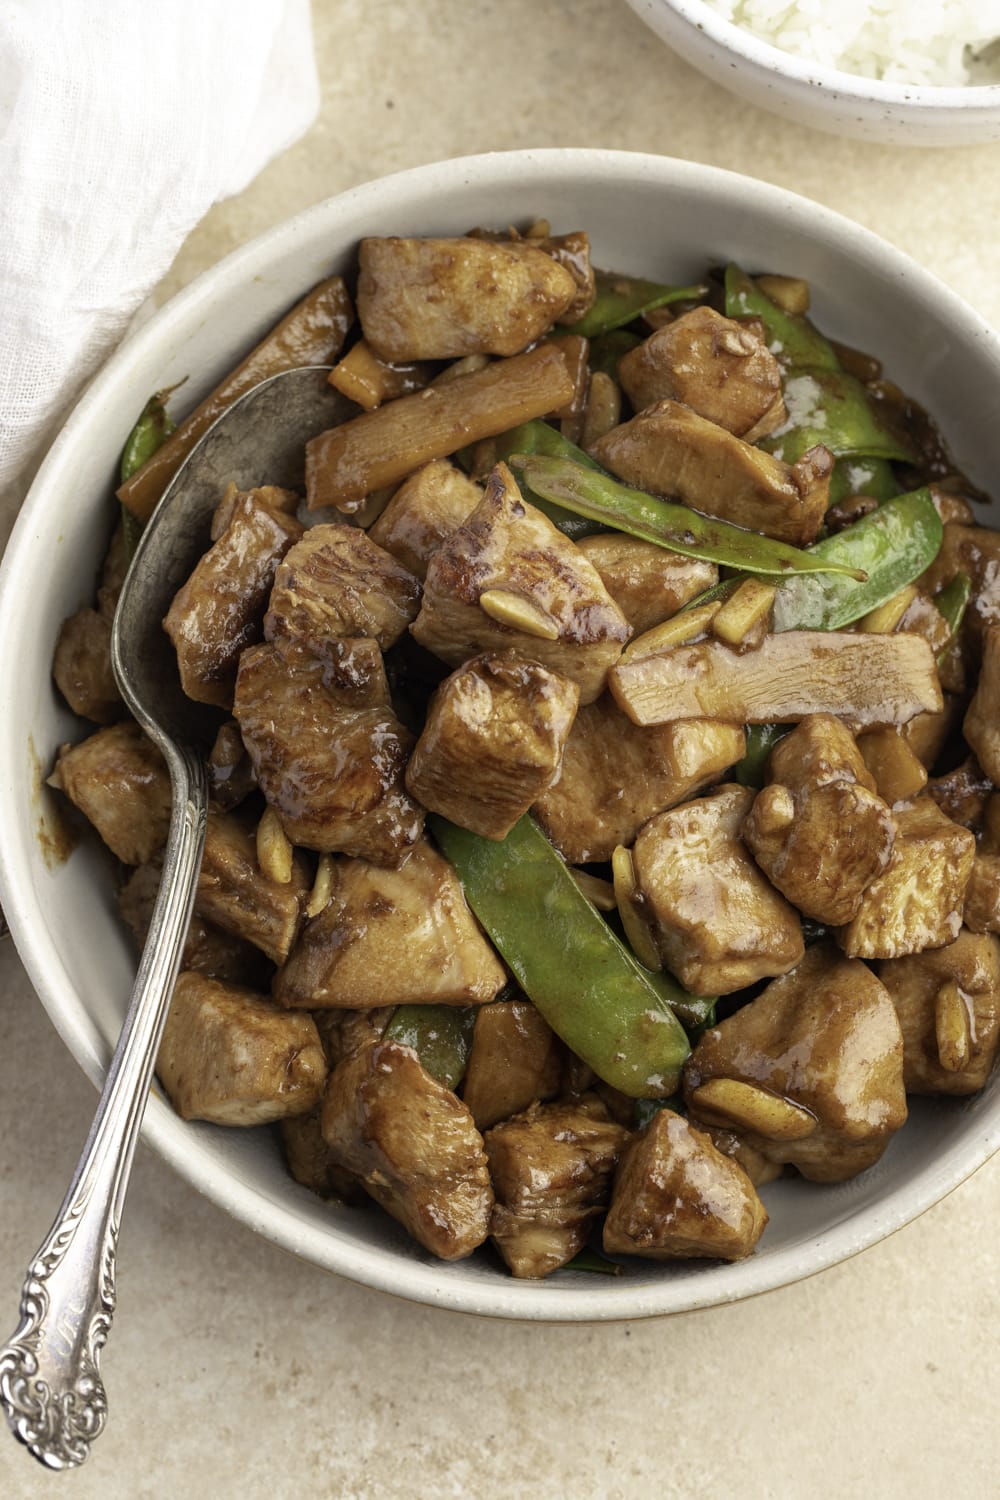 Chinese Almond Chicken With Snow Peas and Sliced Almond